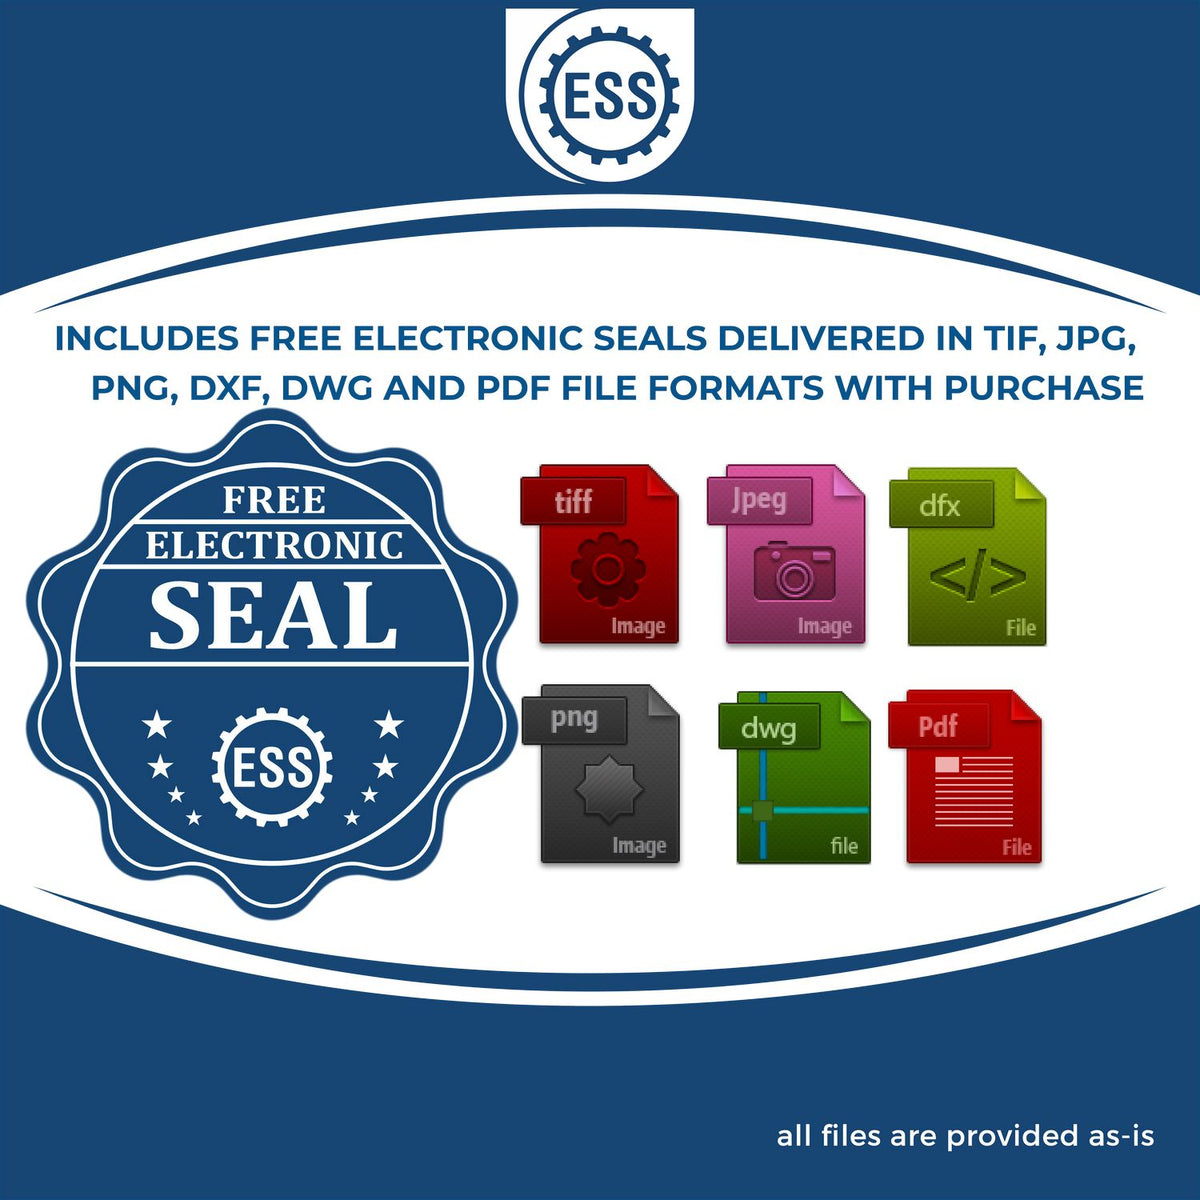 An infographic for the free electronic seal for the Slim Pre-Inked Maryland Land Surveyor Seal Stamp illustrating the different file type icons such as DXF, DWG, TIF, JPG and PNG.